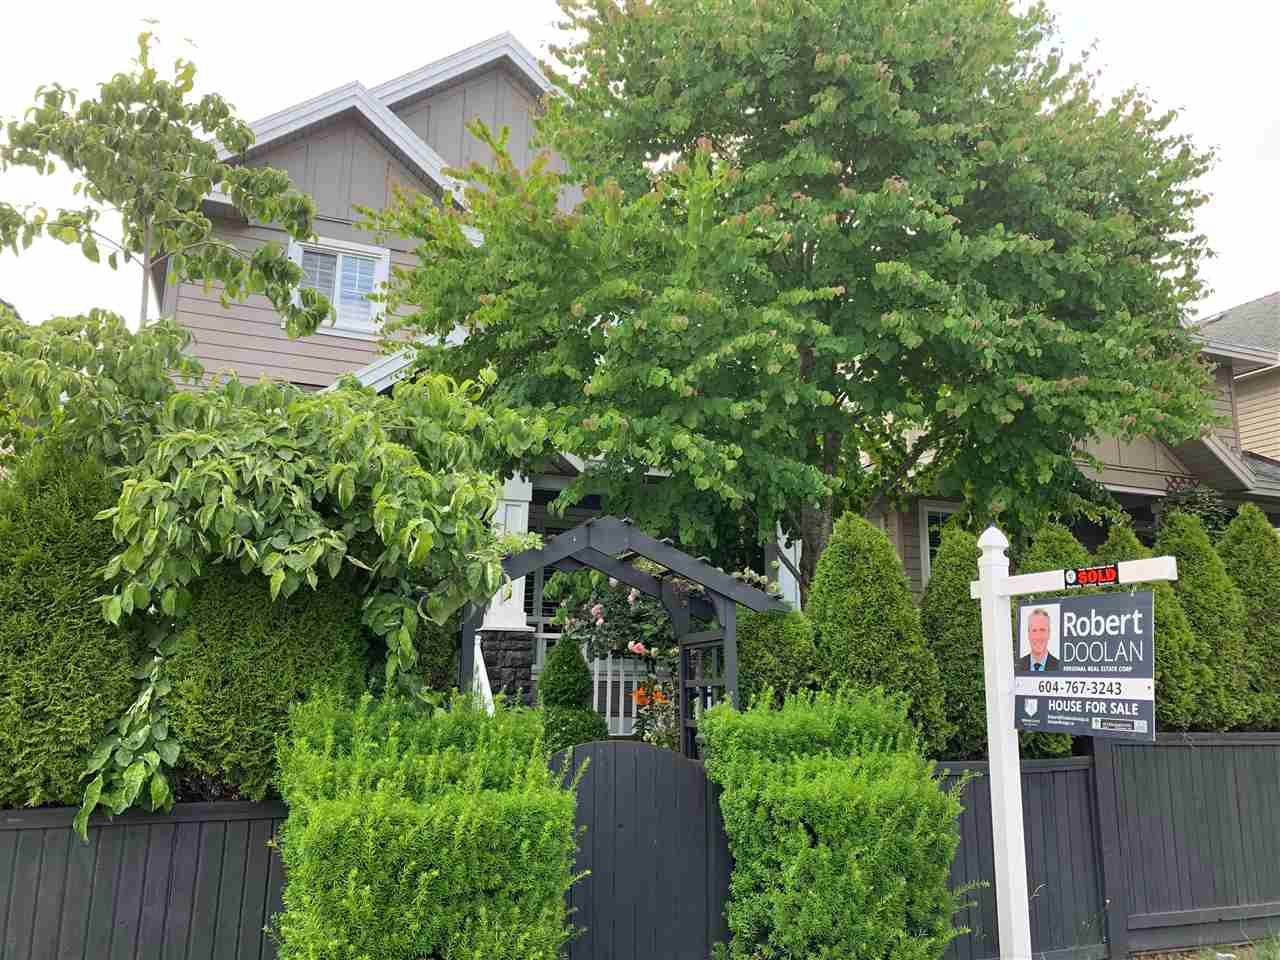 Open House. Open House on Thursday, May 23, 2019 10:00AM - 12:00PM
Head North on 152 street and turn right on 29A ave.  Access is from back lane off 29A.